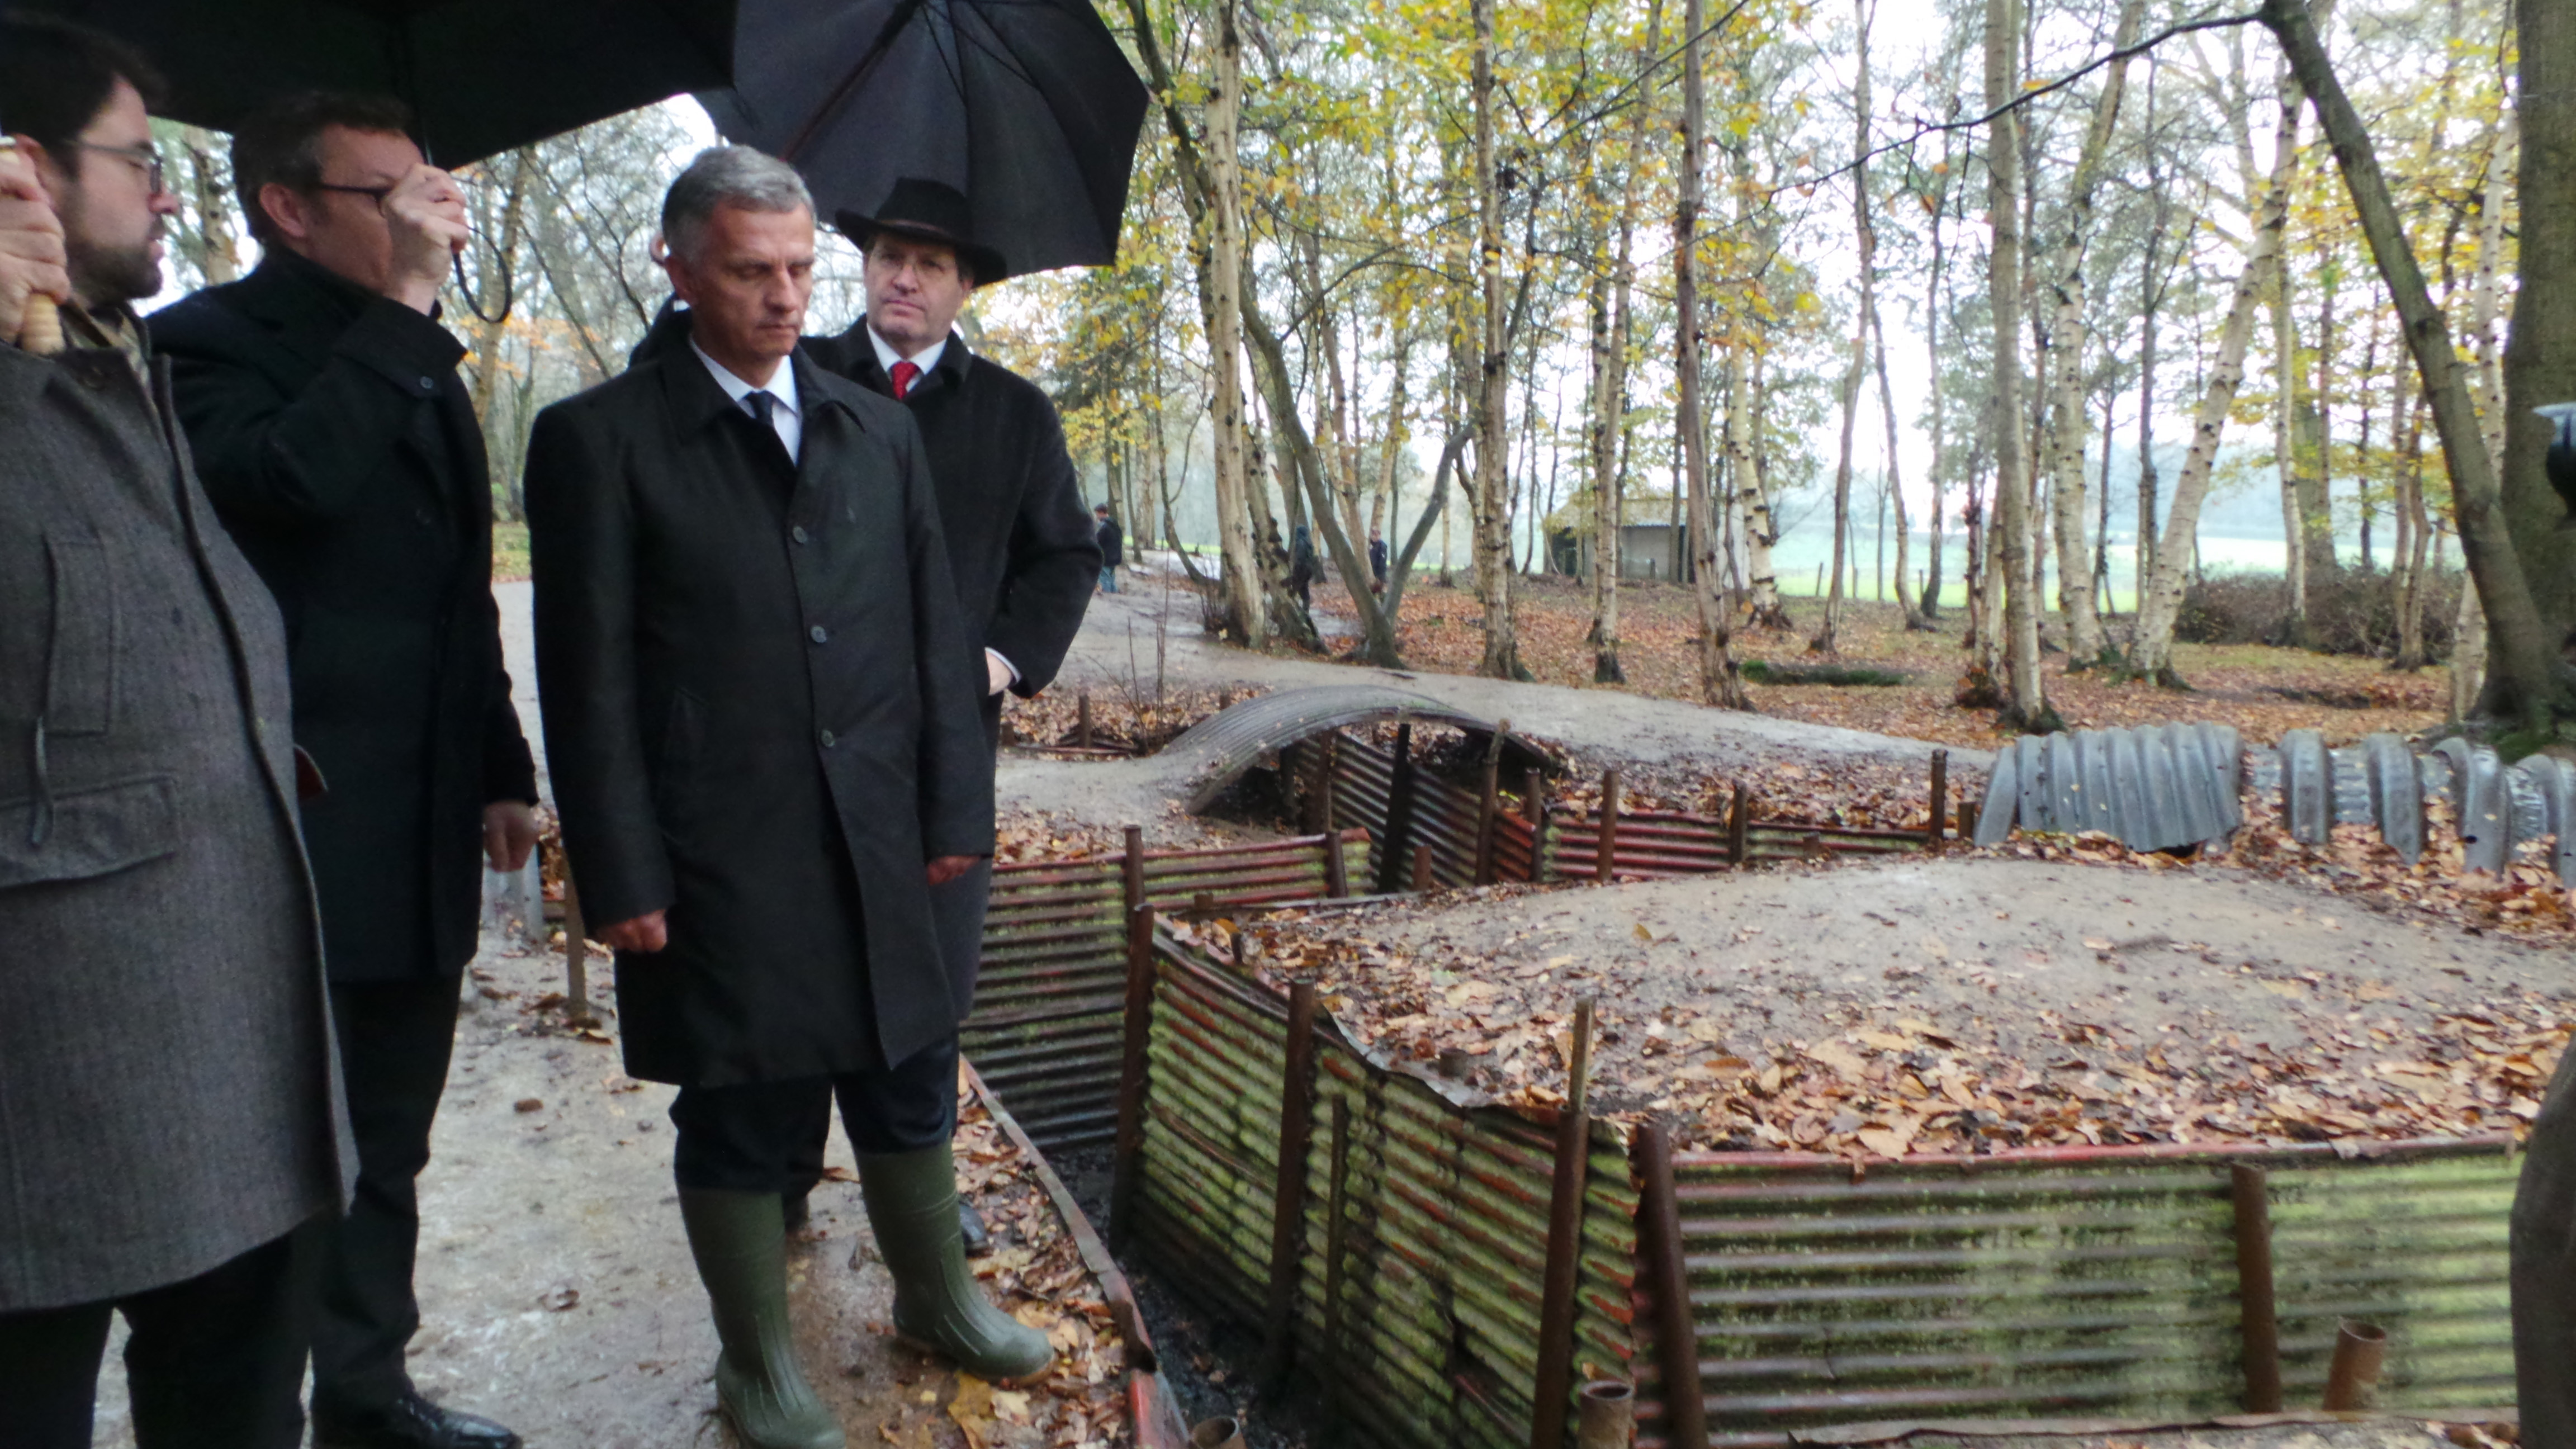 The President of the Swiss Confederation, Didier Burkhalter, standing next to a section of the "Hill 62" First World War trench near Ypres in Belgium